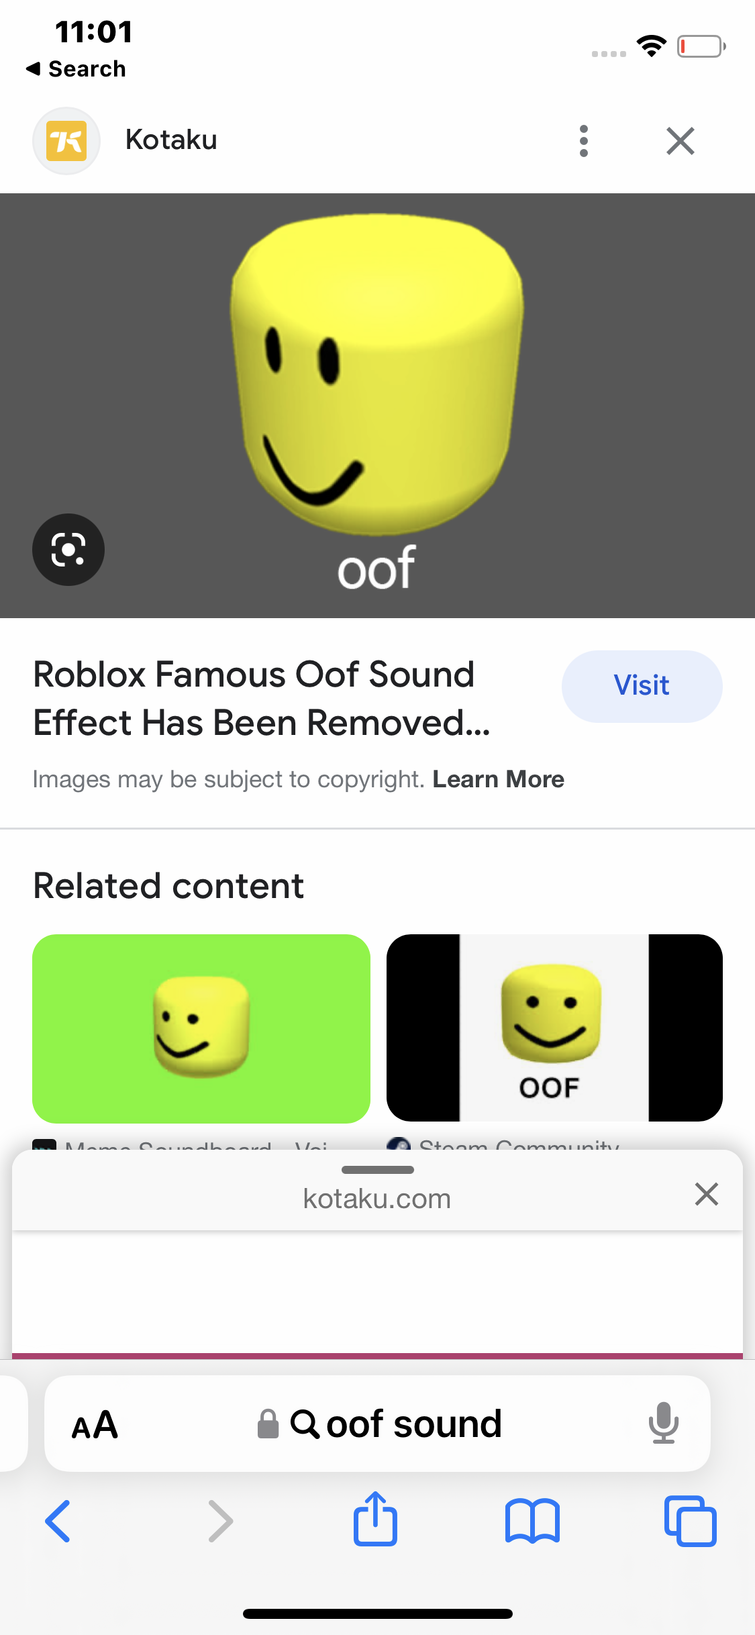 Roblox Famous Oof Sound Effect Has Been Removed From The Game